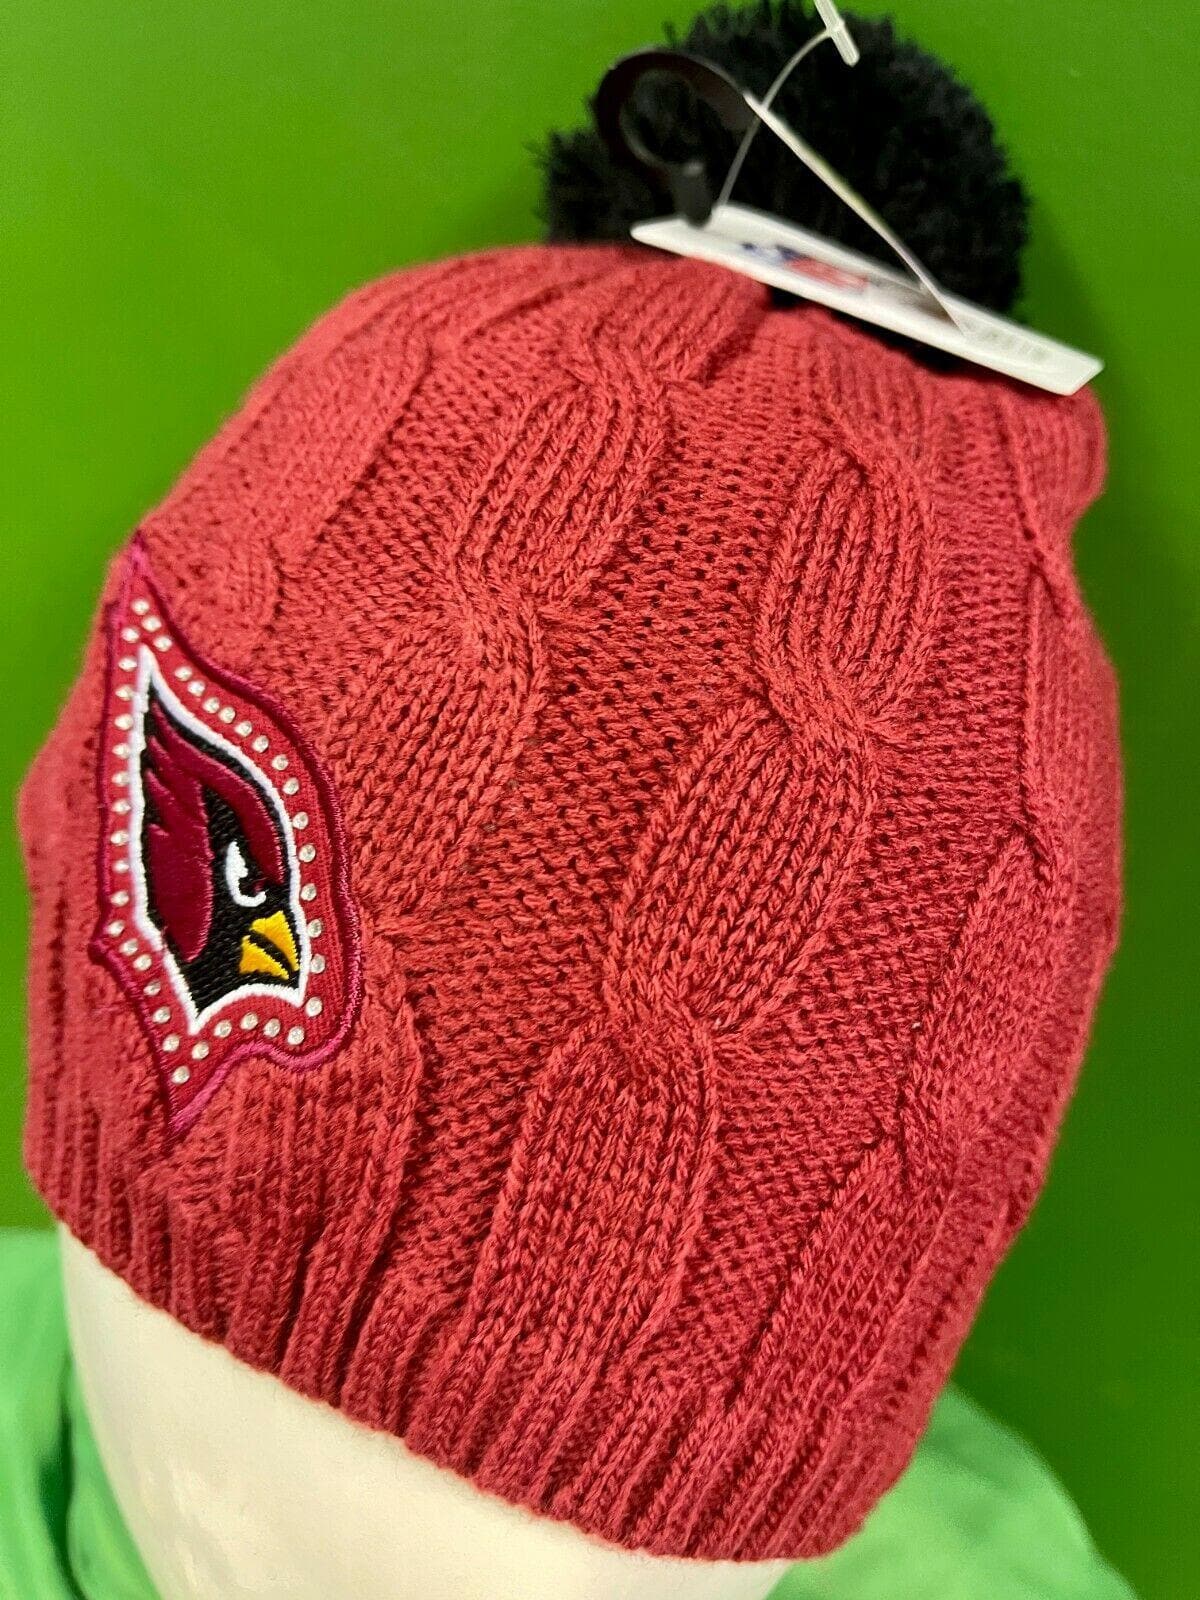 NFL Arizona Cardinals Cable Knit Woolly Hat Women's OSFA NWT